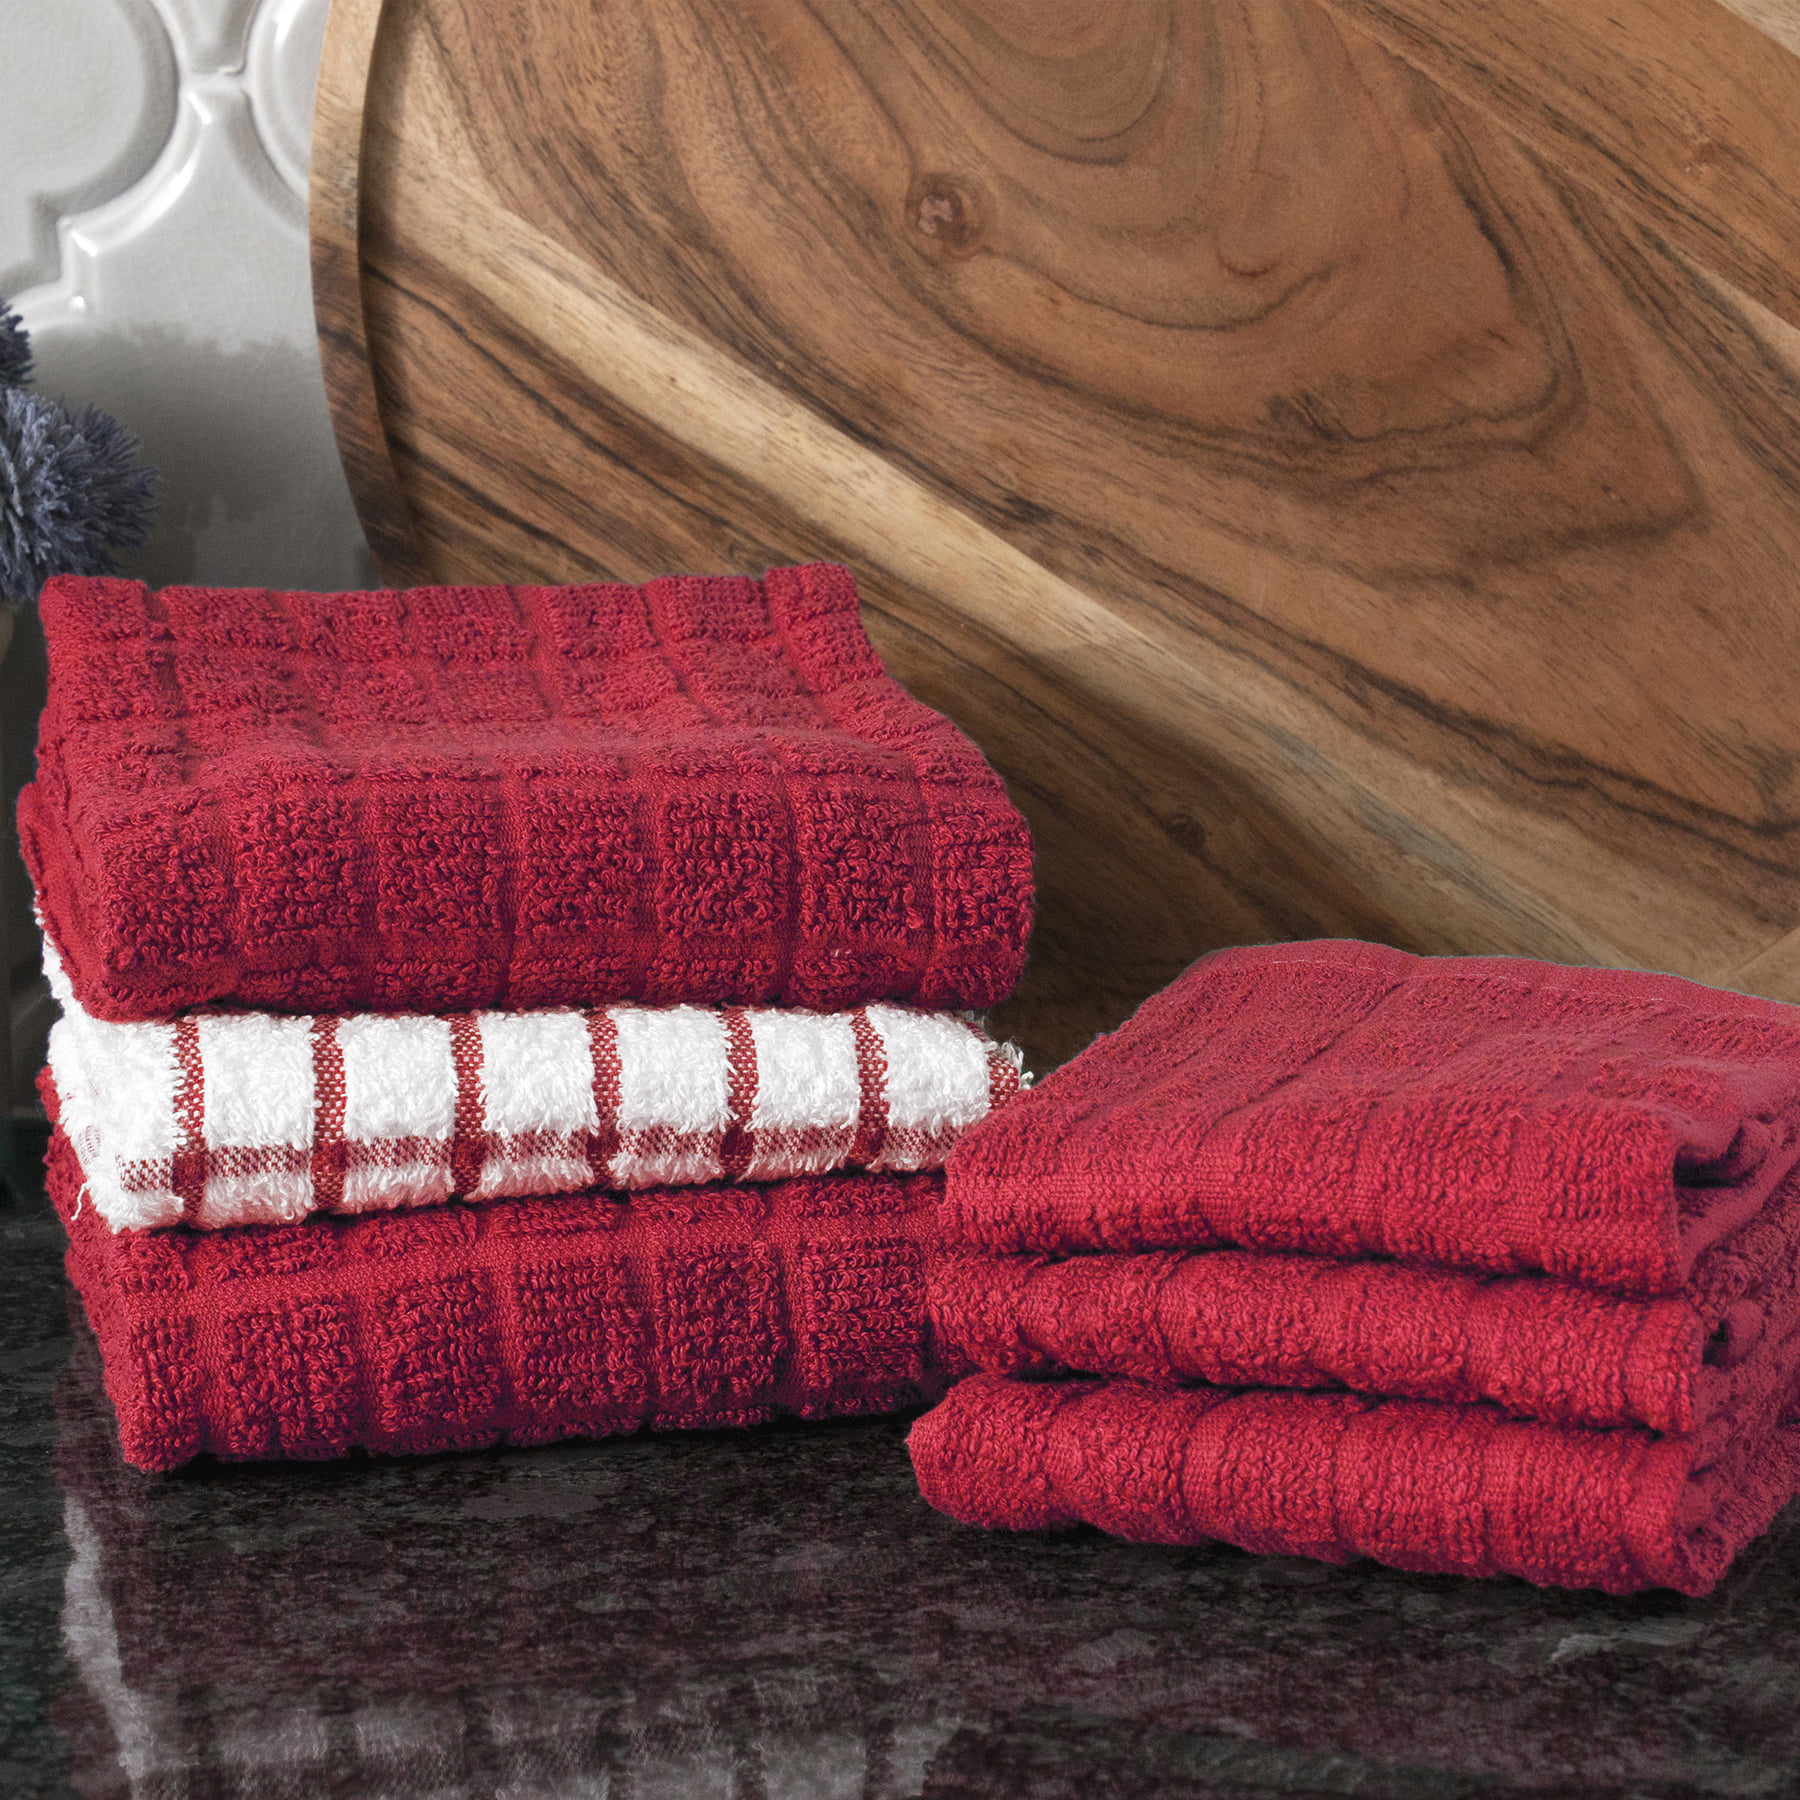 Ritz 6-Pack Terry Kitchen Towel and Dish Cloth Set ,Putty